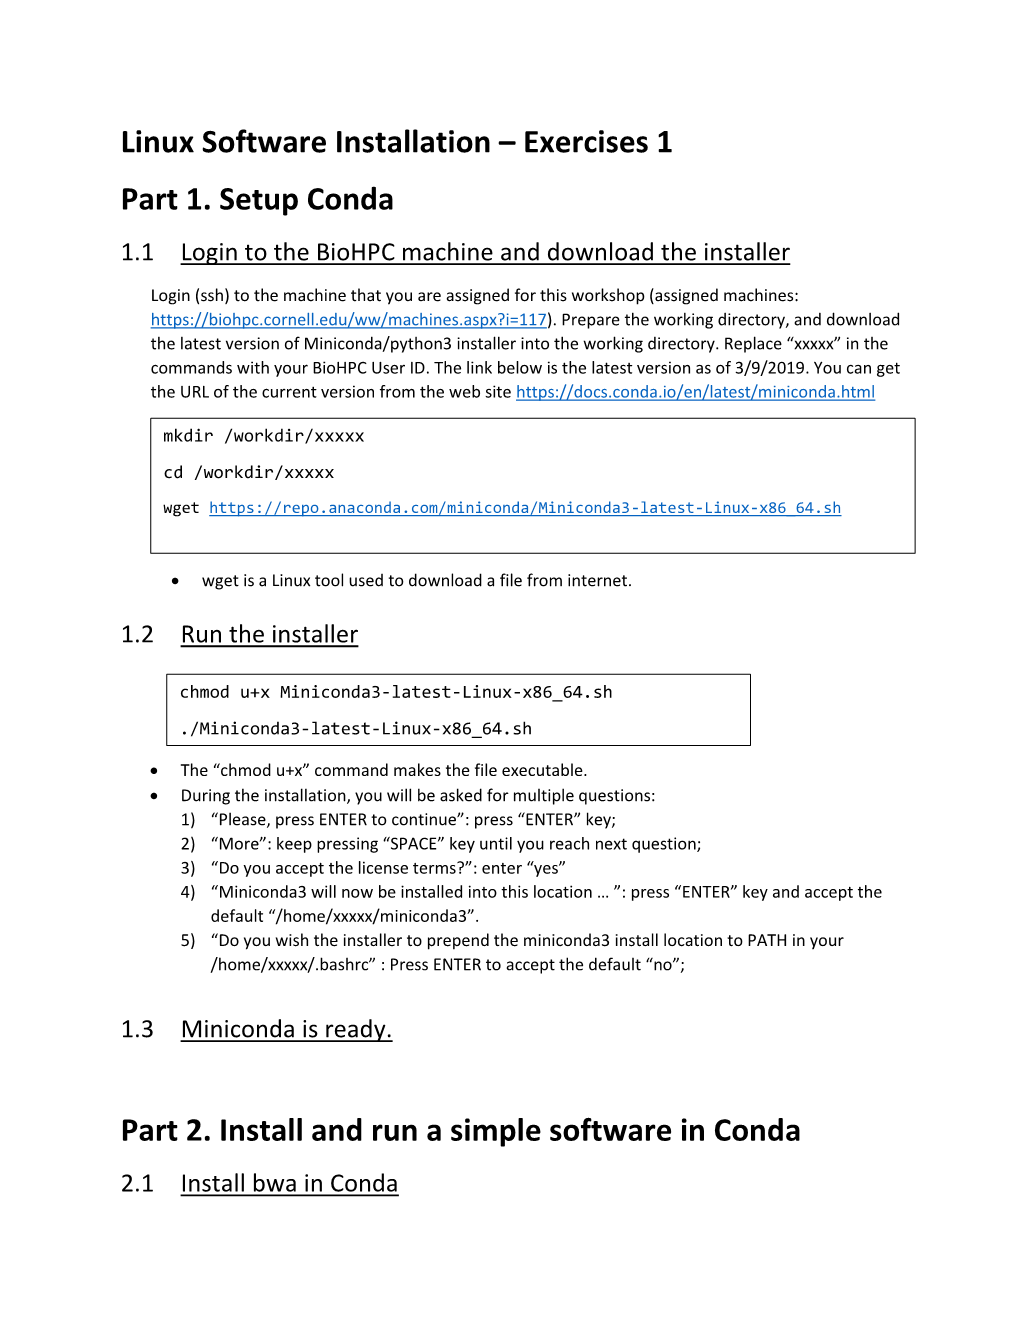 Linux Software Installation – Exercises 1 Part 1. Setup Conda 1.1 Login to the Biohpc Machine and Download the Installer